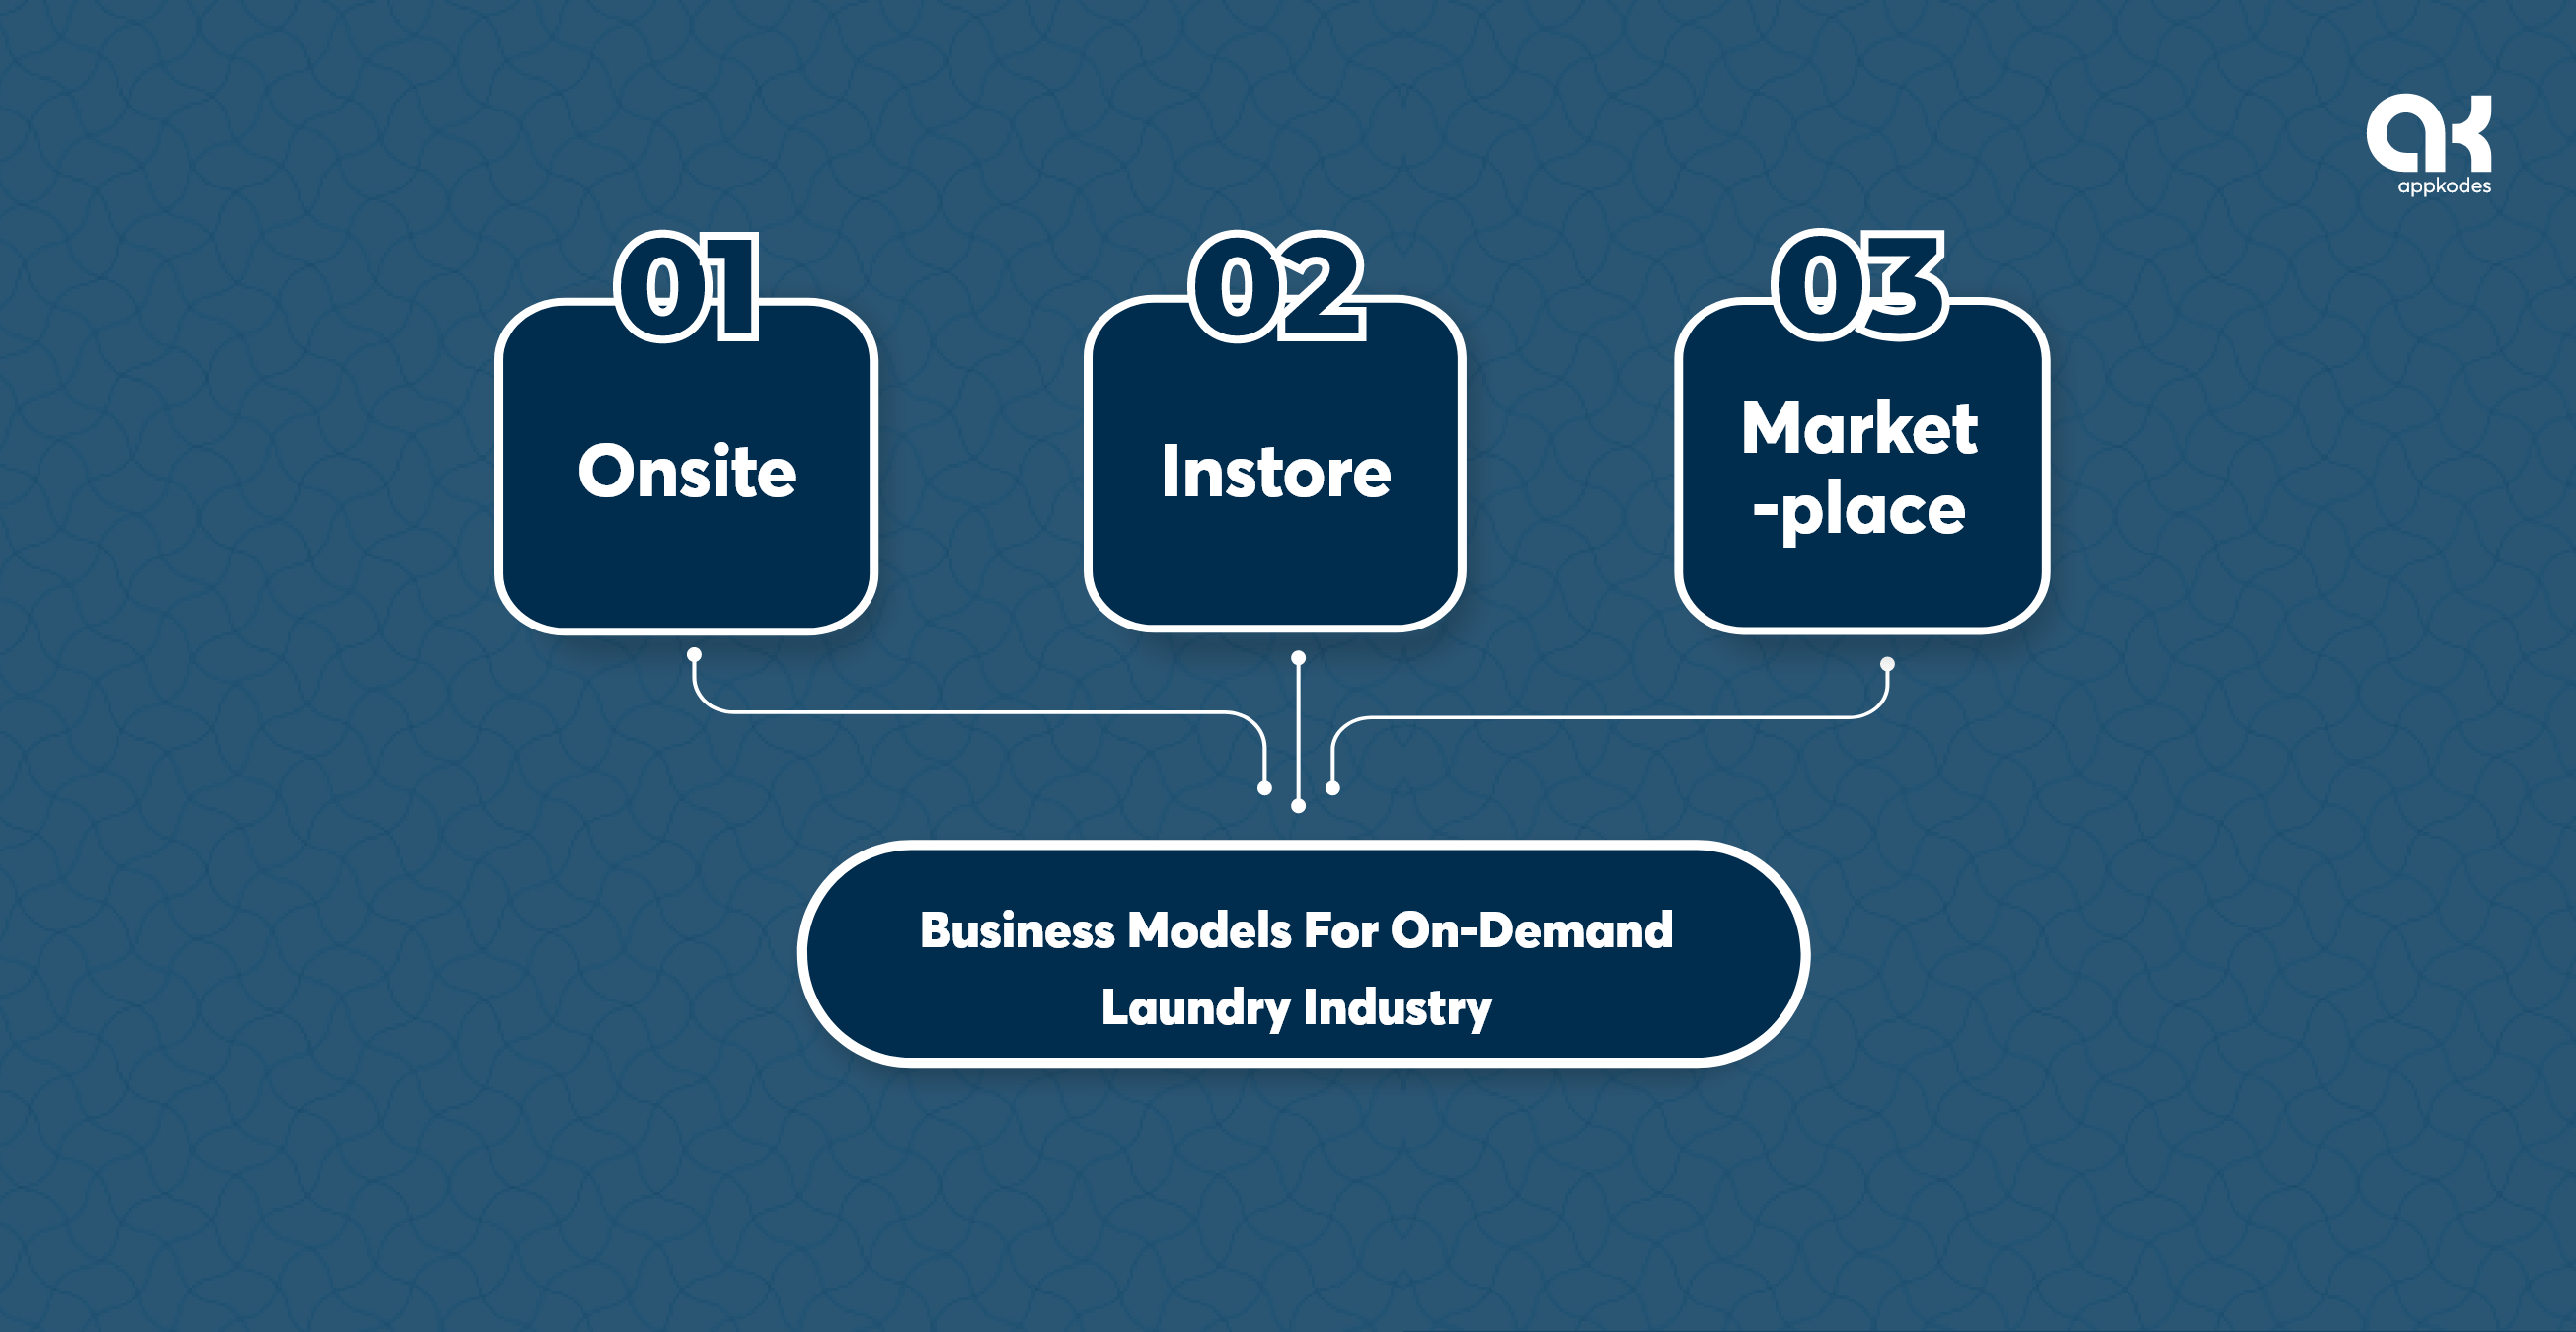 Business Models For On-Demand Laundry Industry